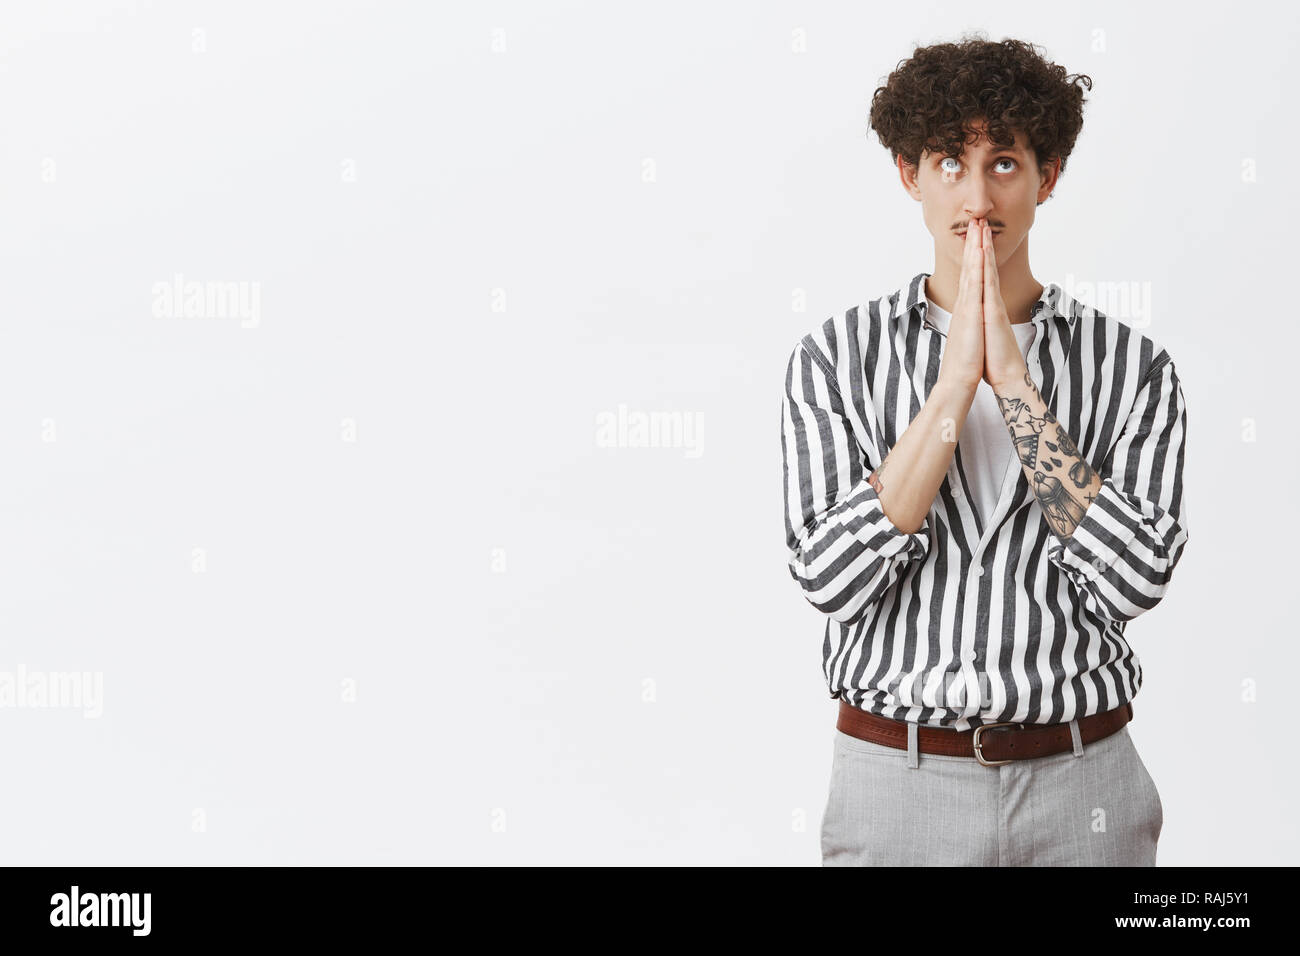 Indoor shot of cute young and stylish jewish guy with dark curly hair moustache and tatoos in striped shirt and pants holding hands in pray looking up while making wish having faith in god Stock Photo